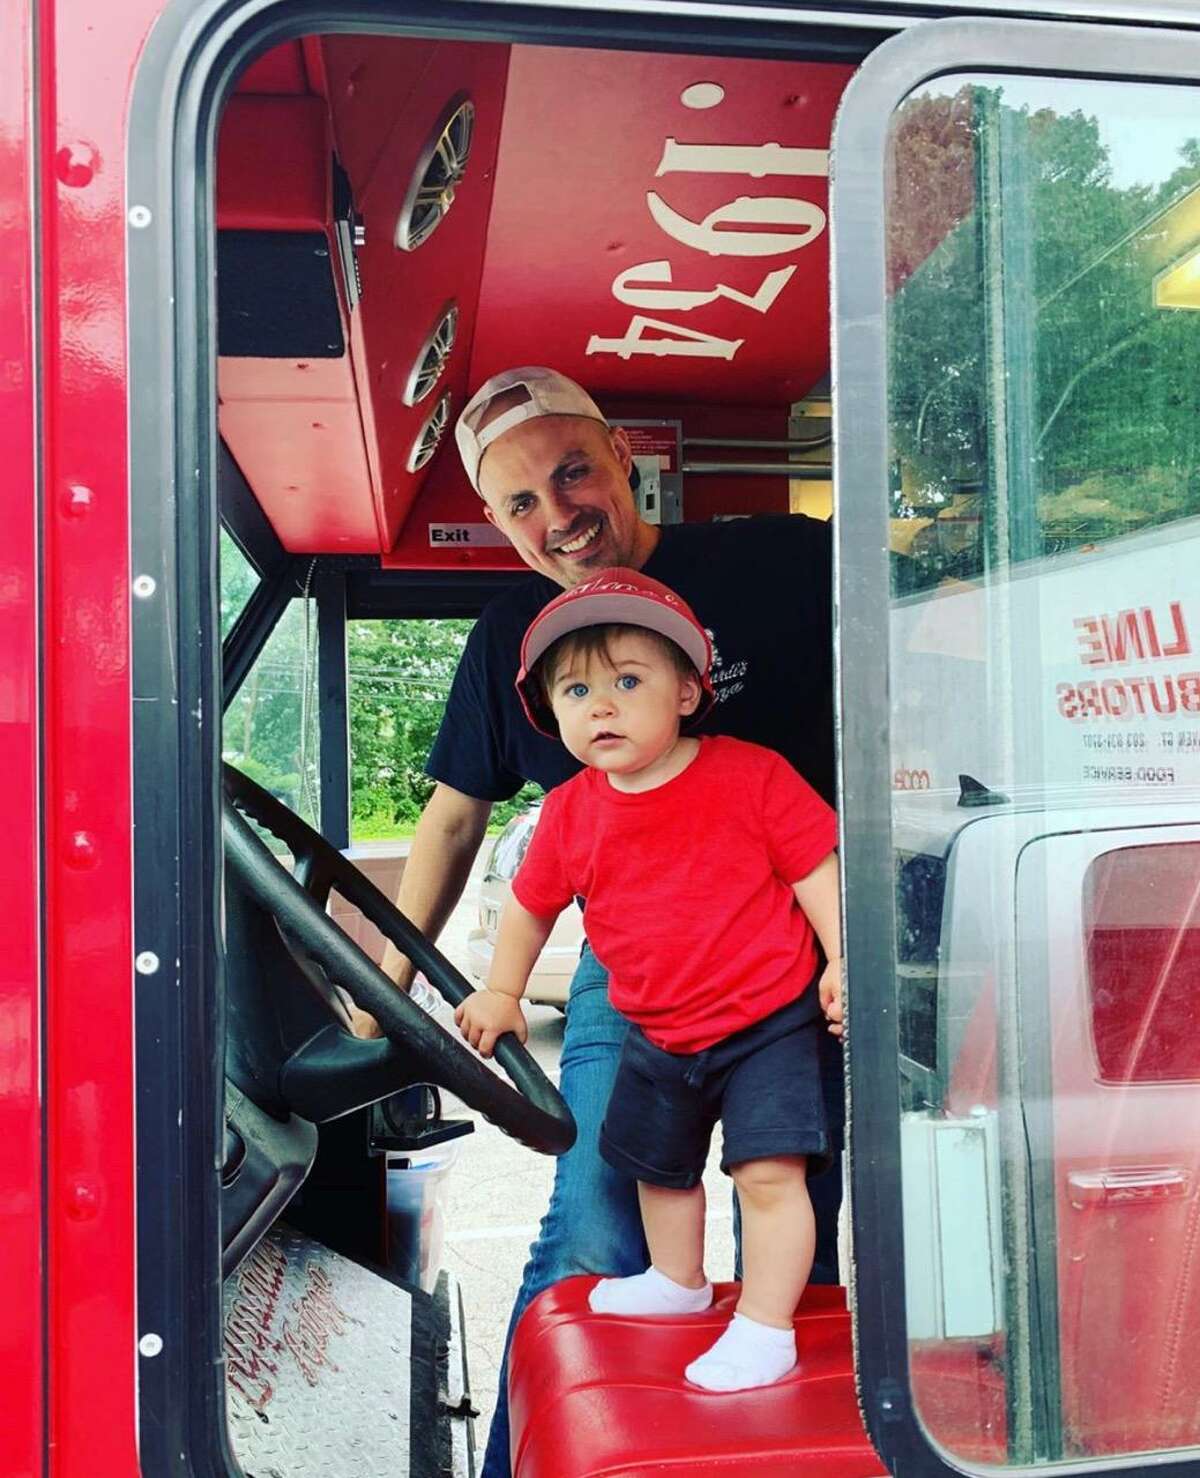 Jimmy Ormrod, of Zuppardi’s Apizza, who runs a satellite location from The Hops Co. in Derby, readies his pizza truck with his son Sebastian, 2.